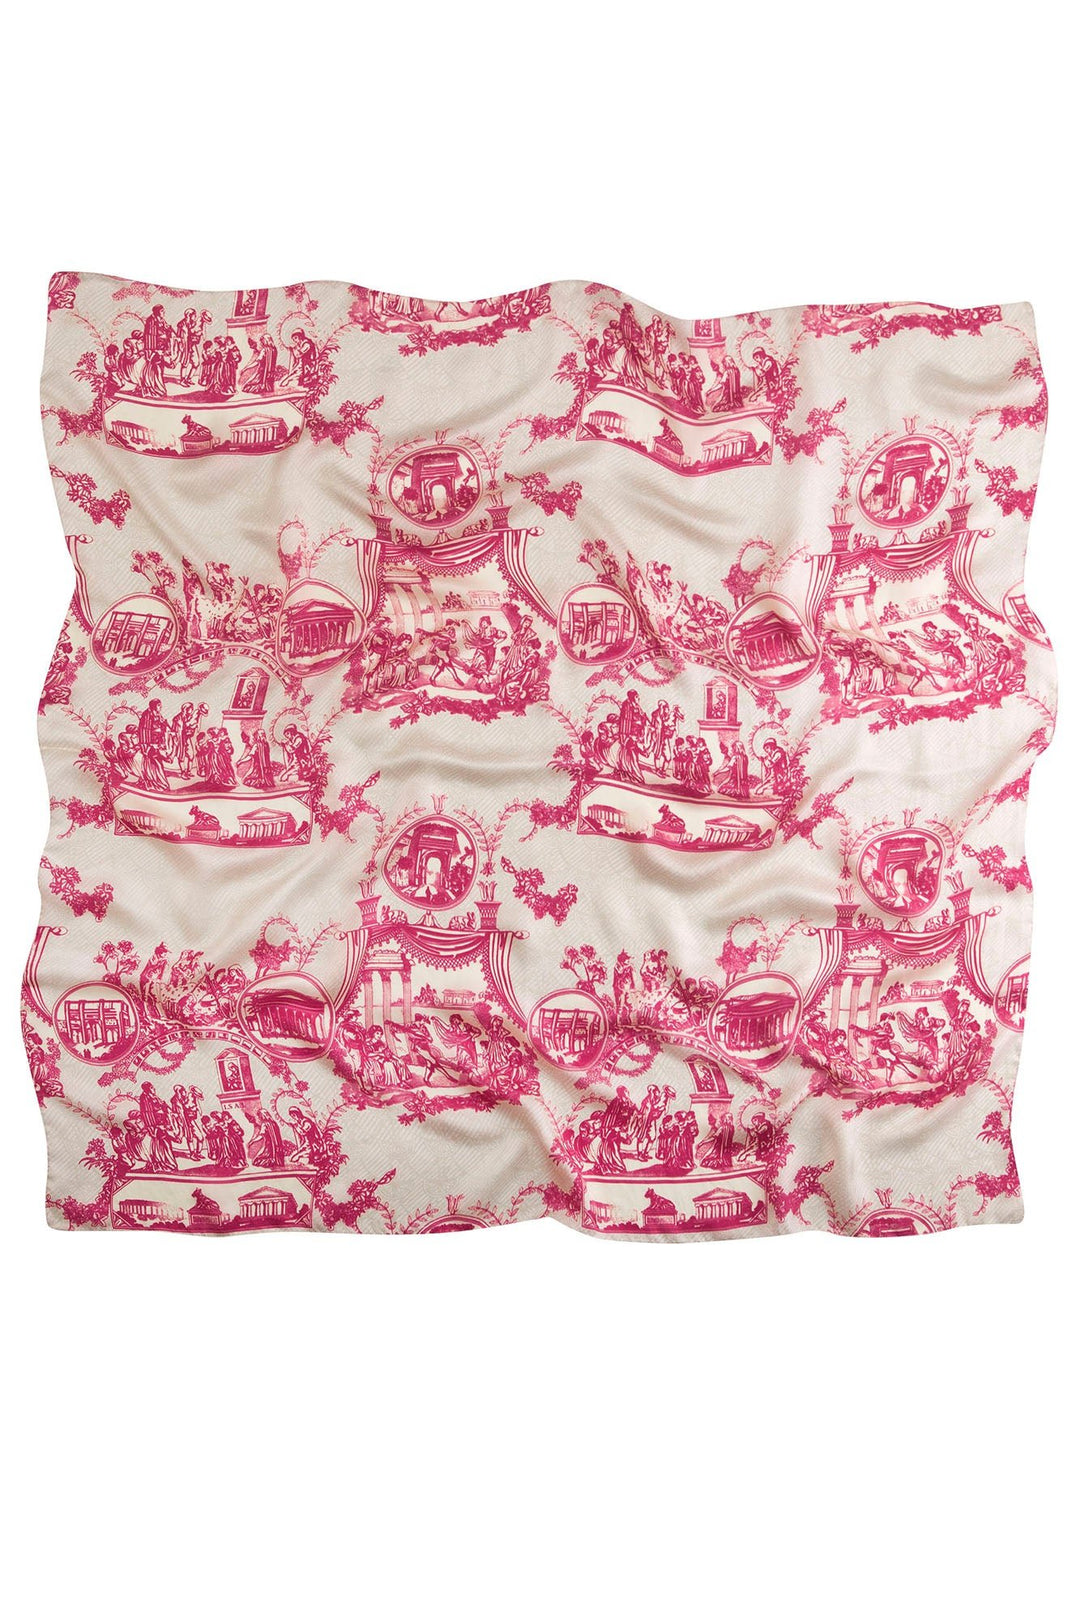 Ancient Columns Pink Silk Scarf - One Hundred Stars